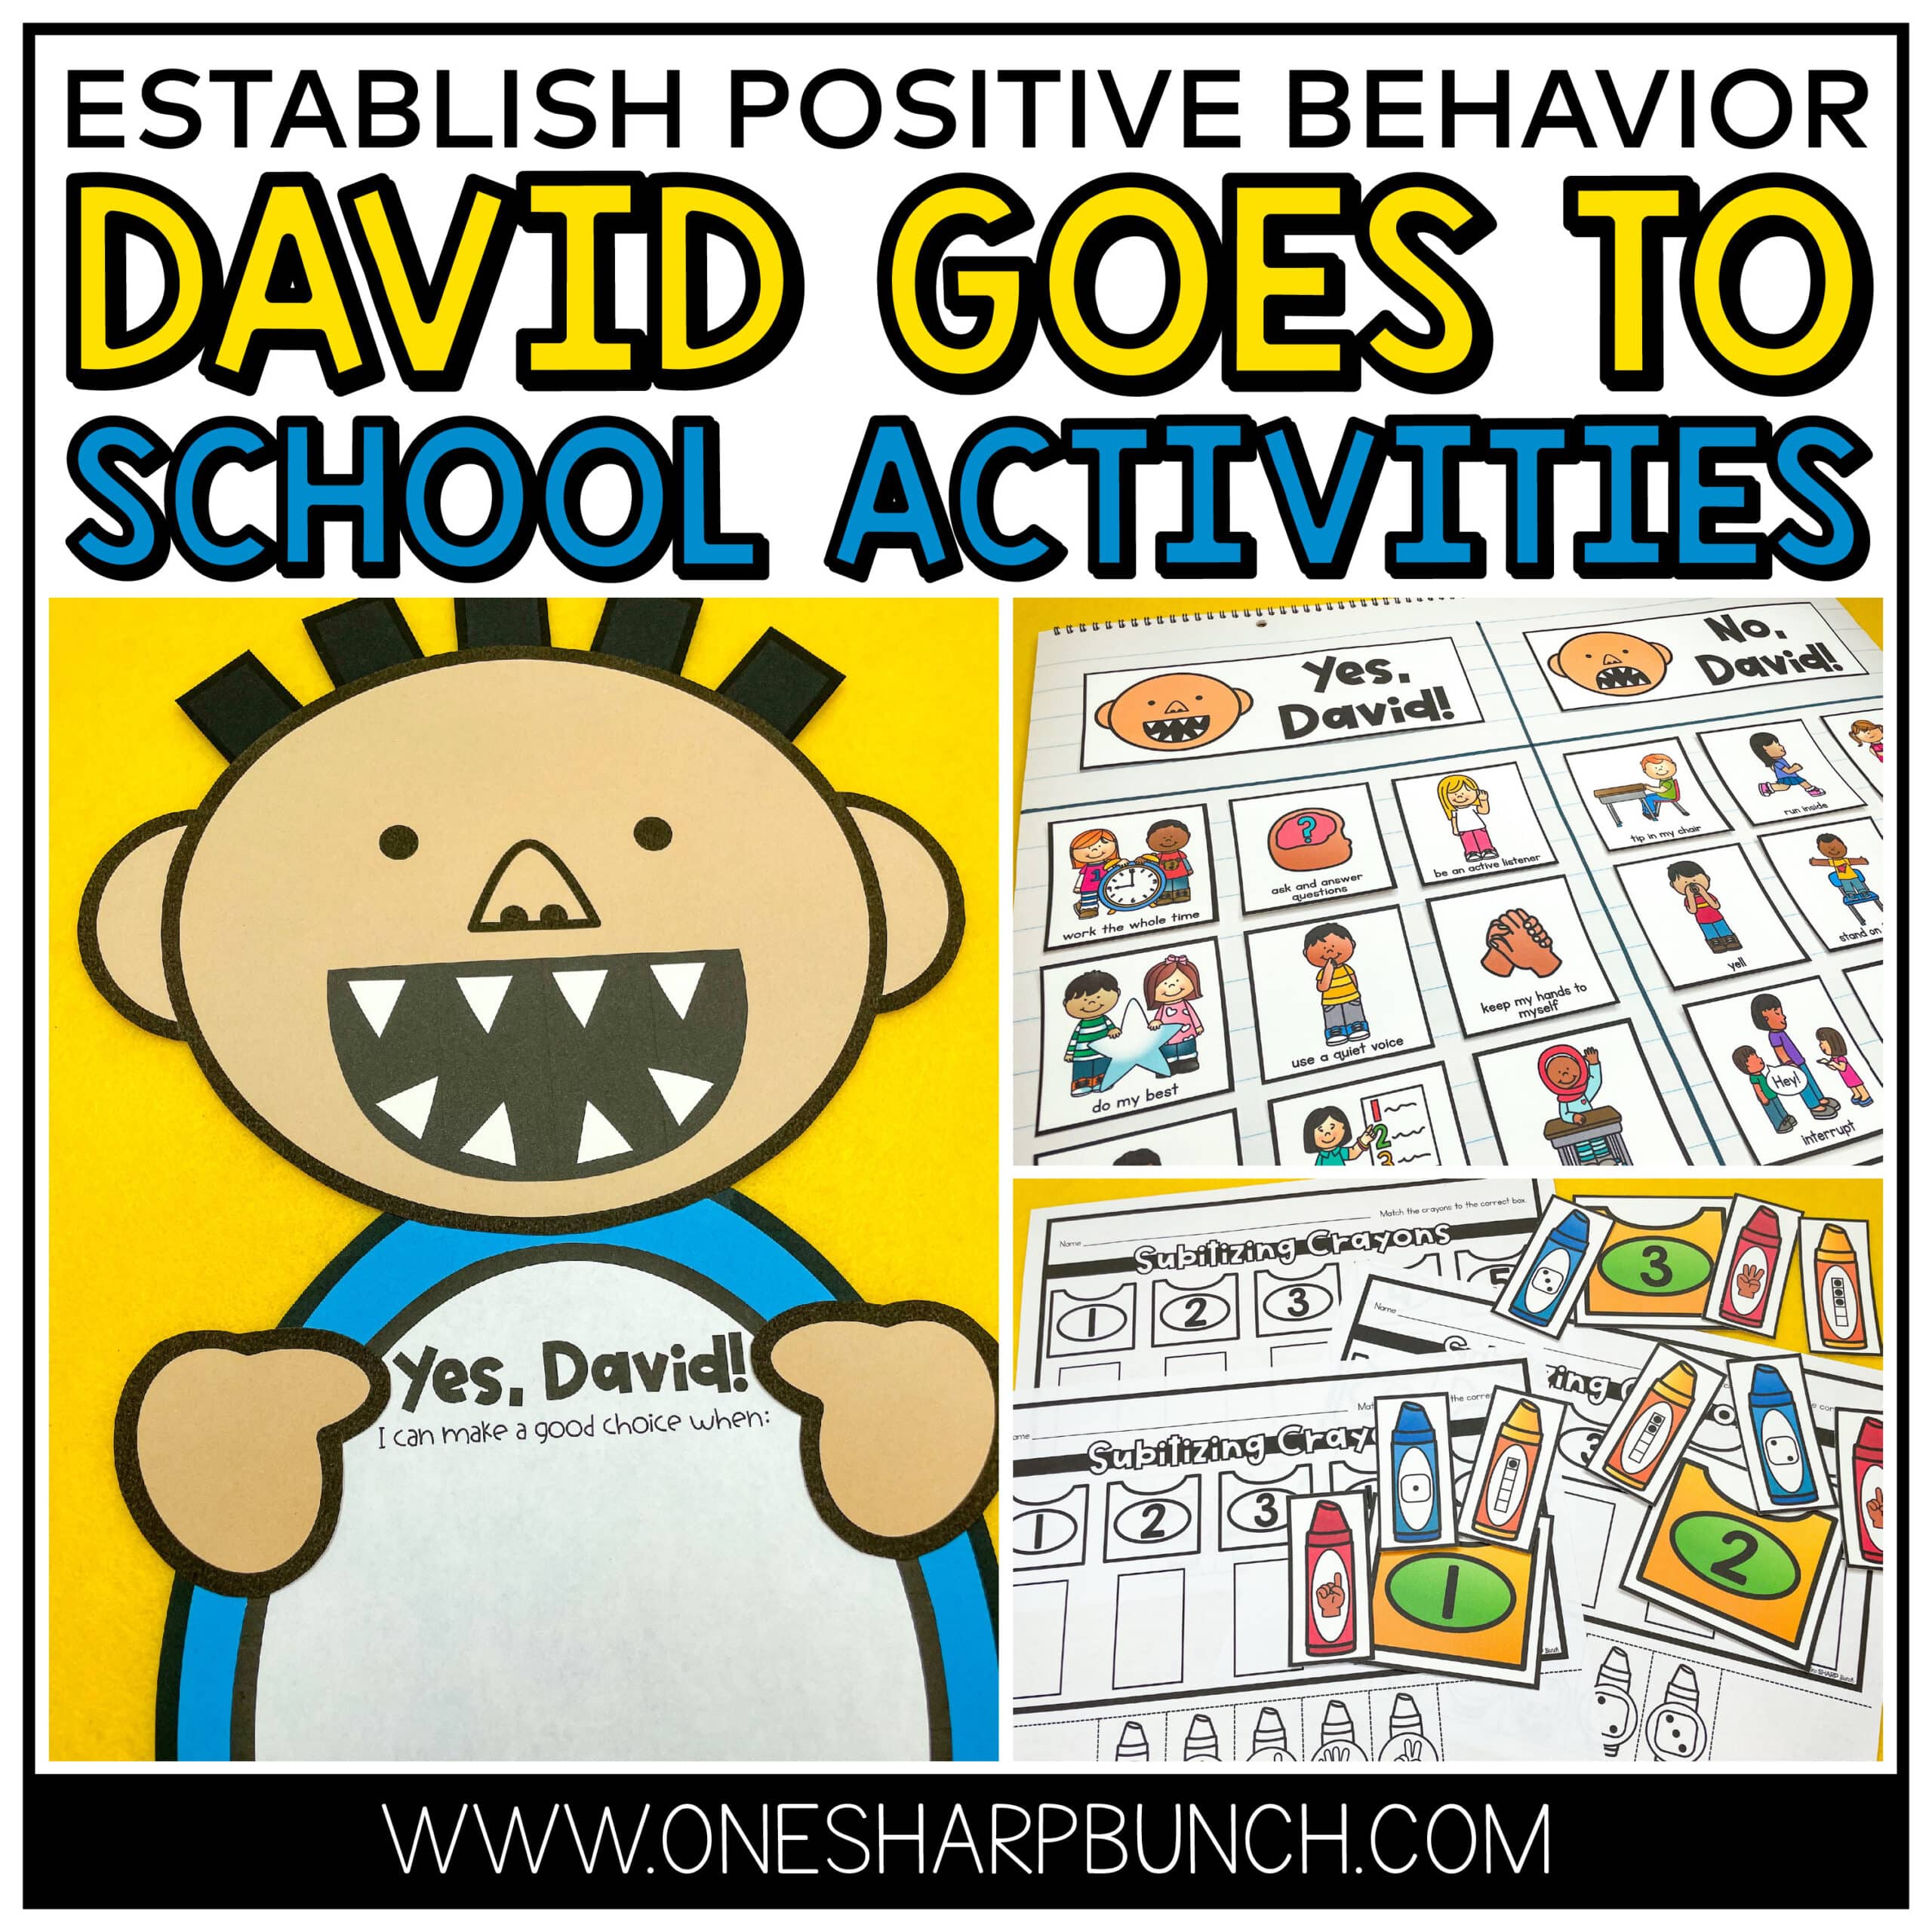 Review classroom rules and encourage positive behavior during the first week of back to school with these David Goes to School activities and craft for preschool, kindergarten and first grade! Perfect for a back to school bulletin board display! Plus, practice the alphabet, rhyming, counting, numbers, 2D shapes and more with the eight math and literacy activities and centers! Tackle classroom management, routines and procedures, as you turn those "No, David!" choices into "Yes, David!" choices!